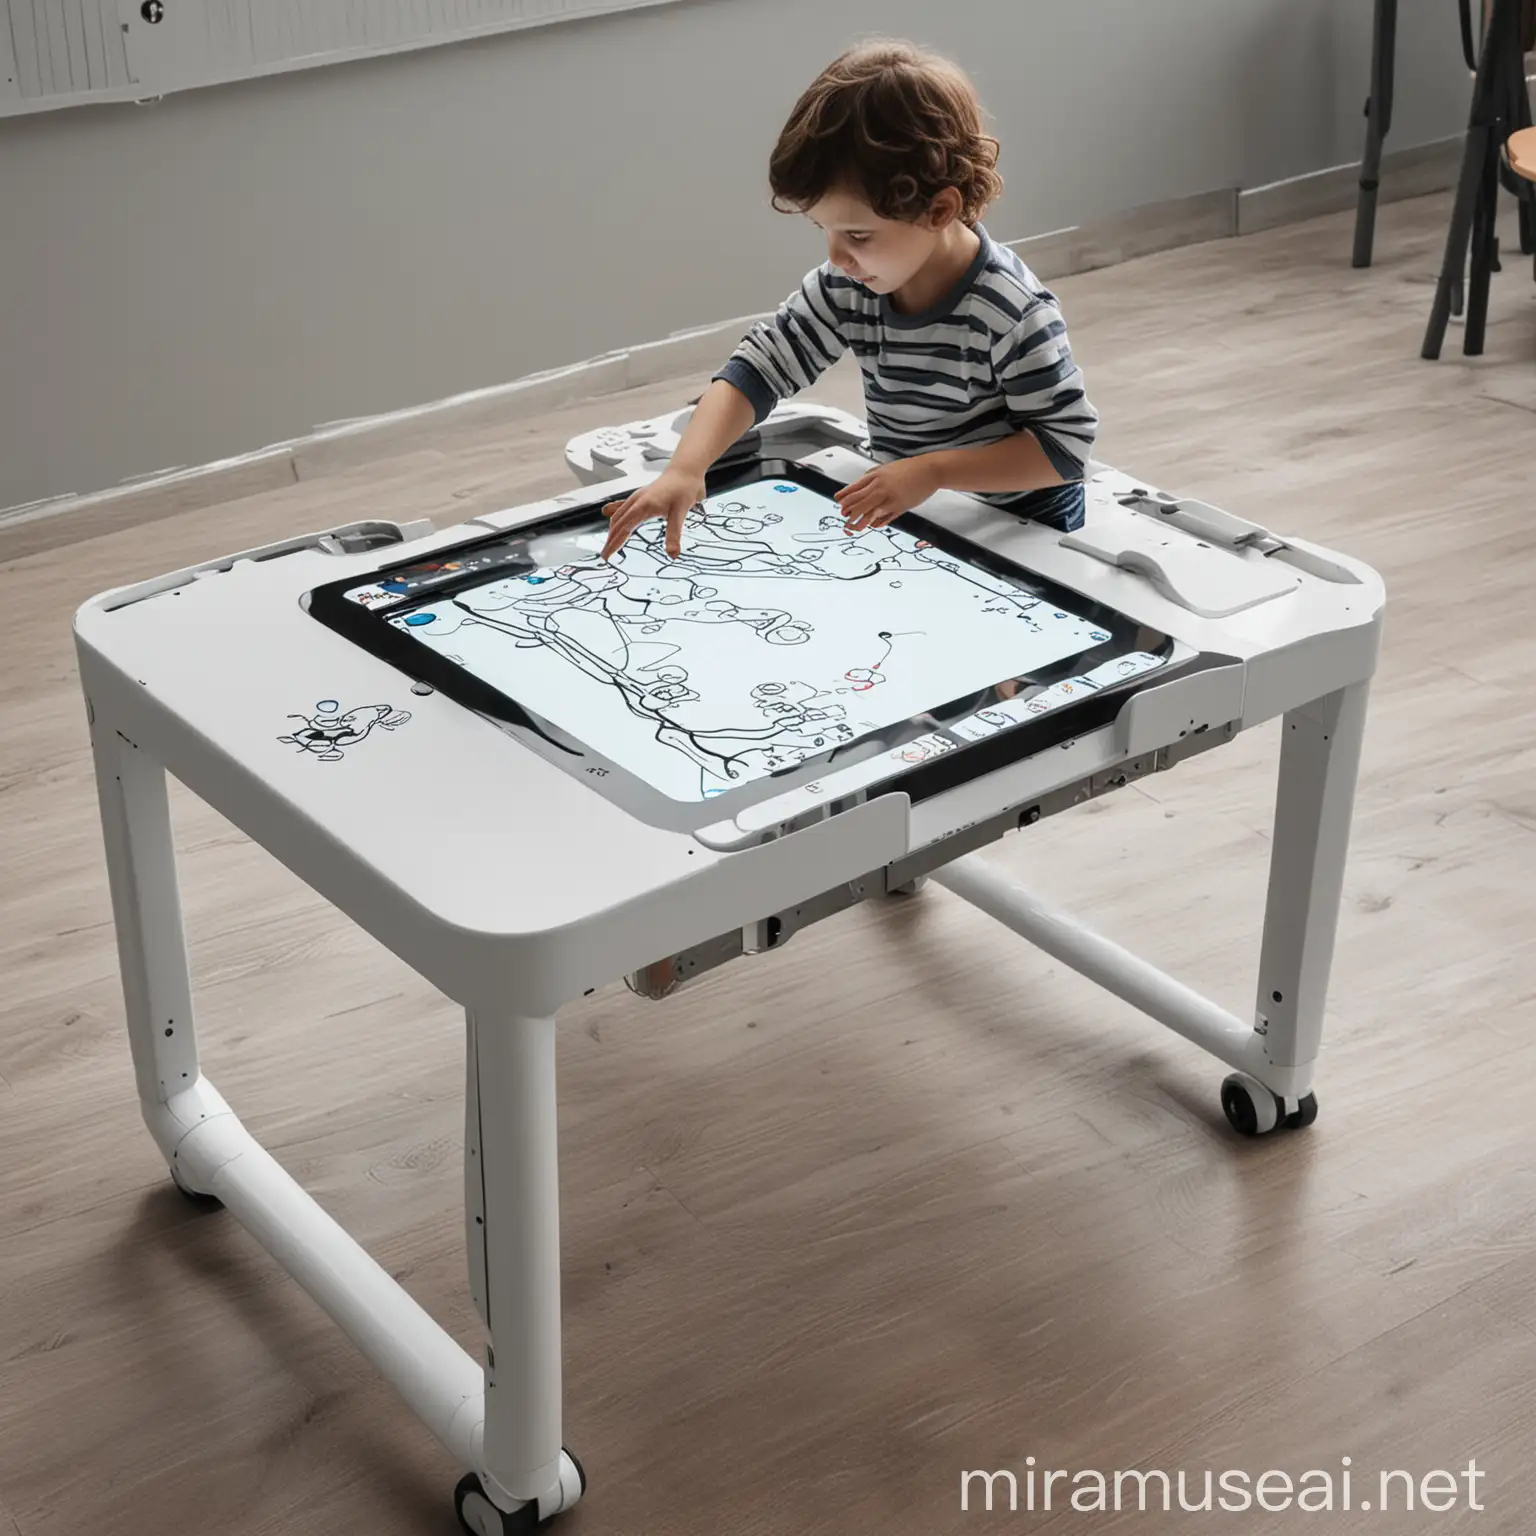 Interactive Kids Learning Table with Robot Companion Sketch